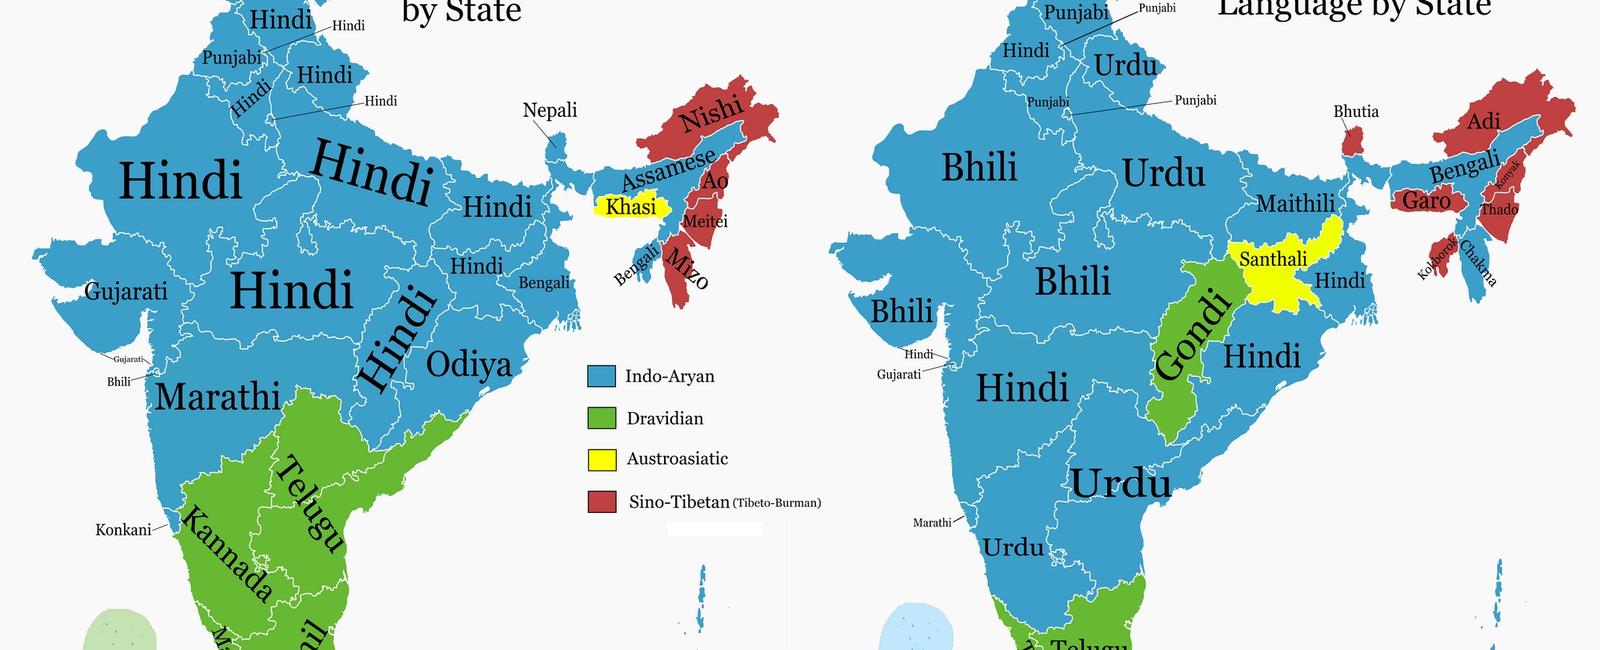 While hindi is the most widely spoken language in india there are actually 22 official languages throughout the country